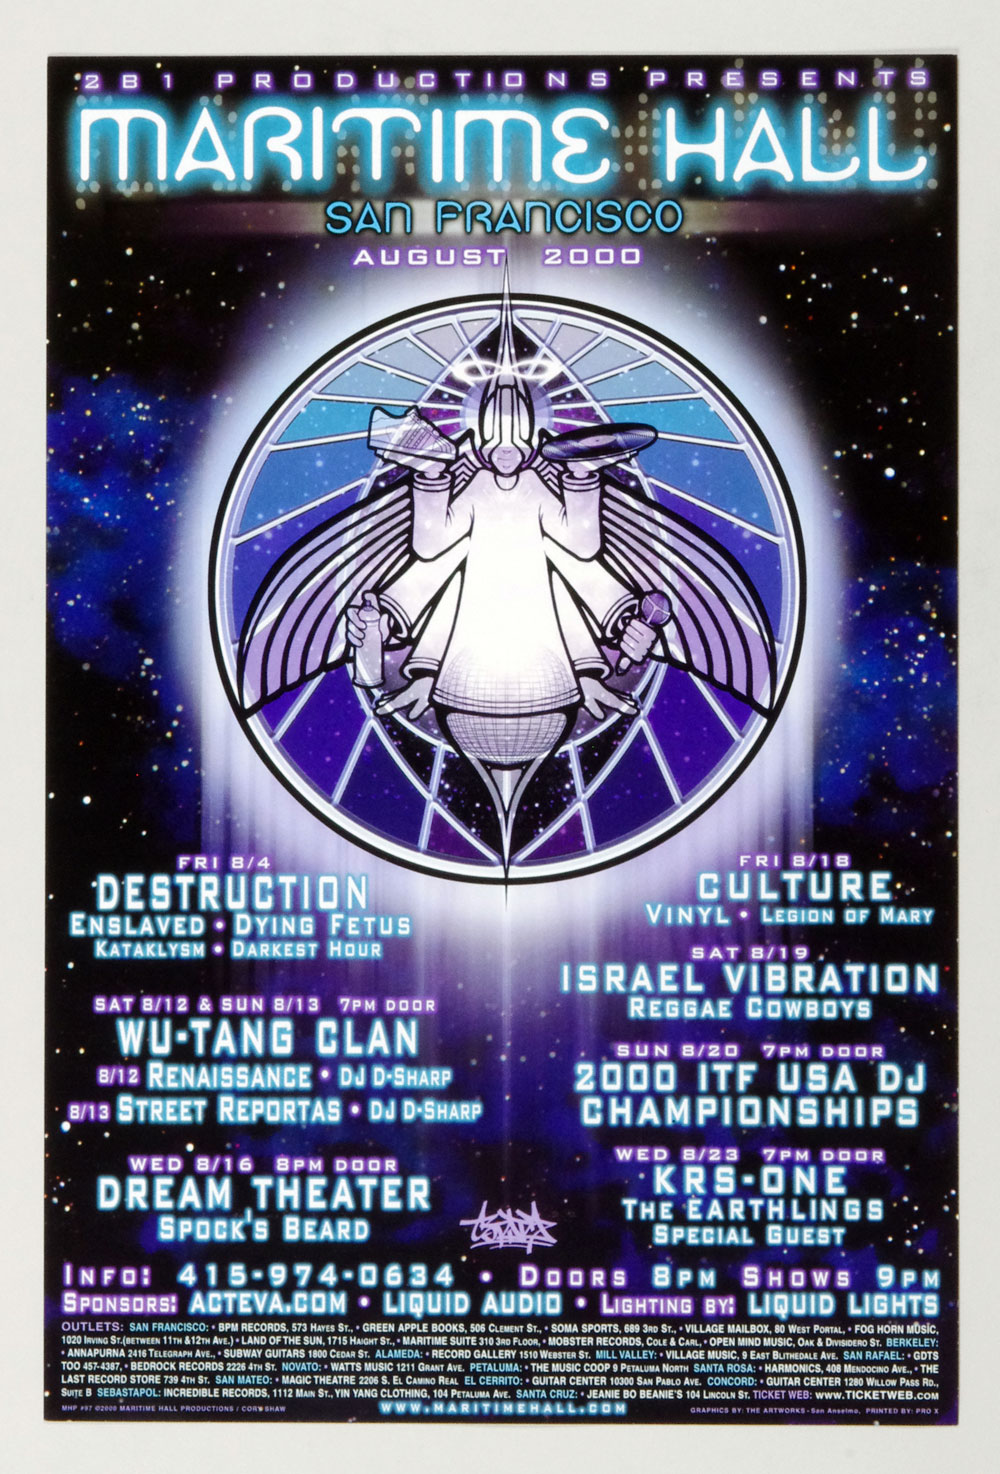 Maritime Hall 2000 Aug Poster Wu-Tang Clan Destruction KRS-One Israel Vibration